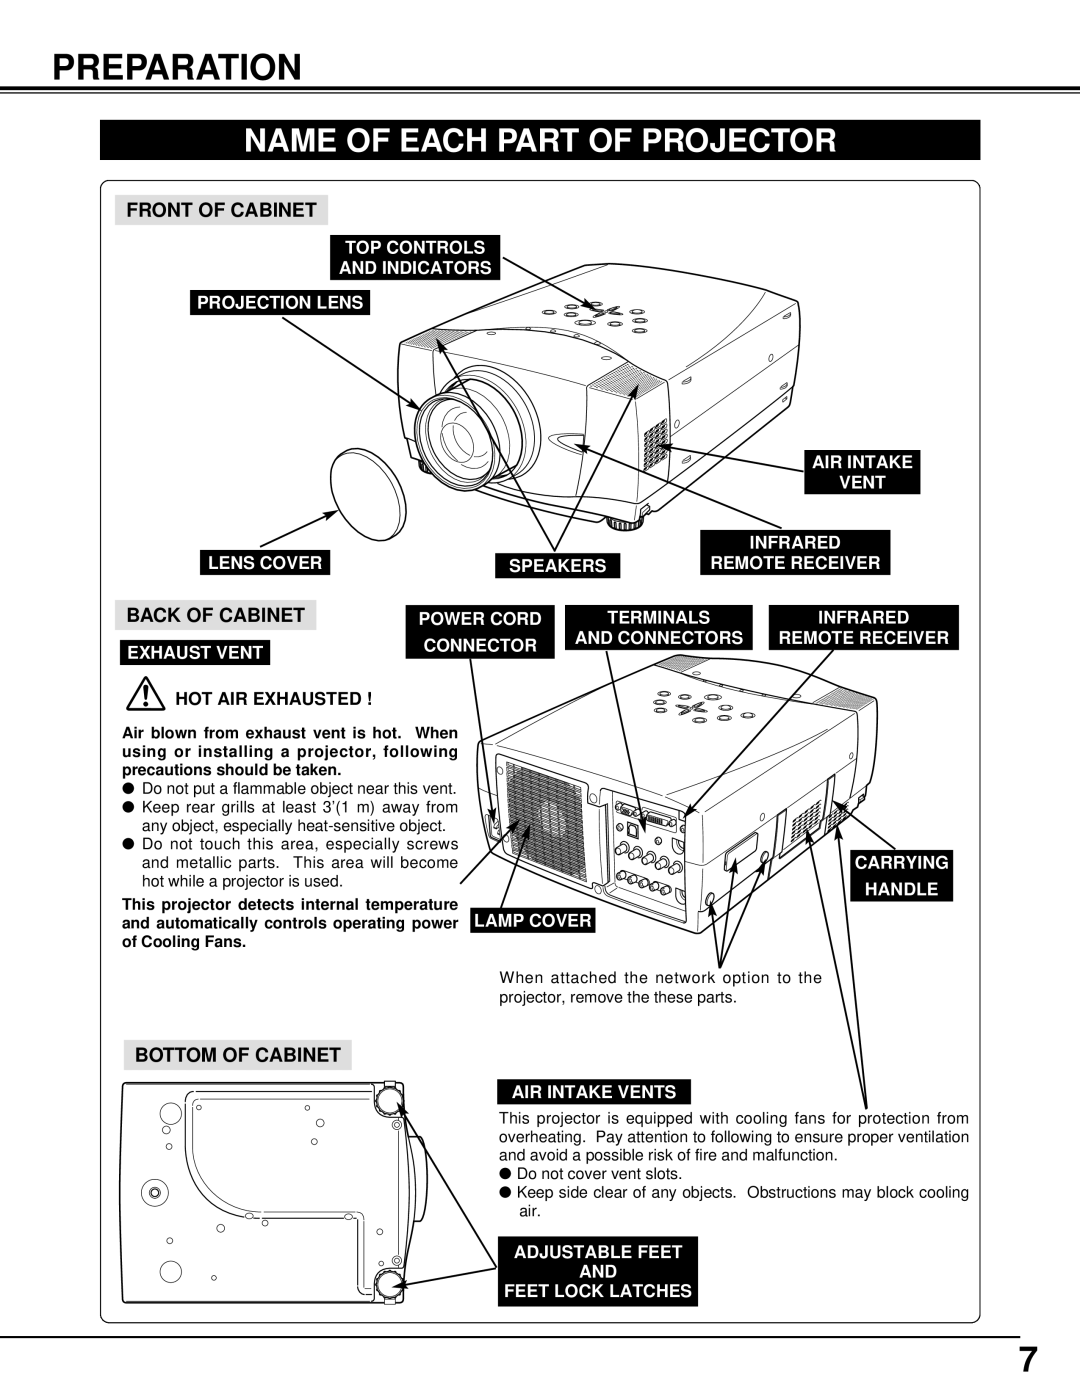 BOXLIGHT MP-42T manual Preparation, Name Of Each Part Of Projector, Front Of Cabinet, Back Of Cabinet, Bottom Of Cabinet 